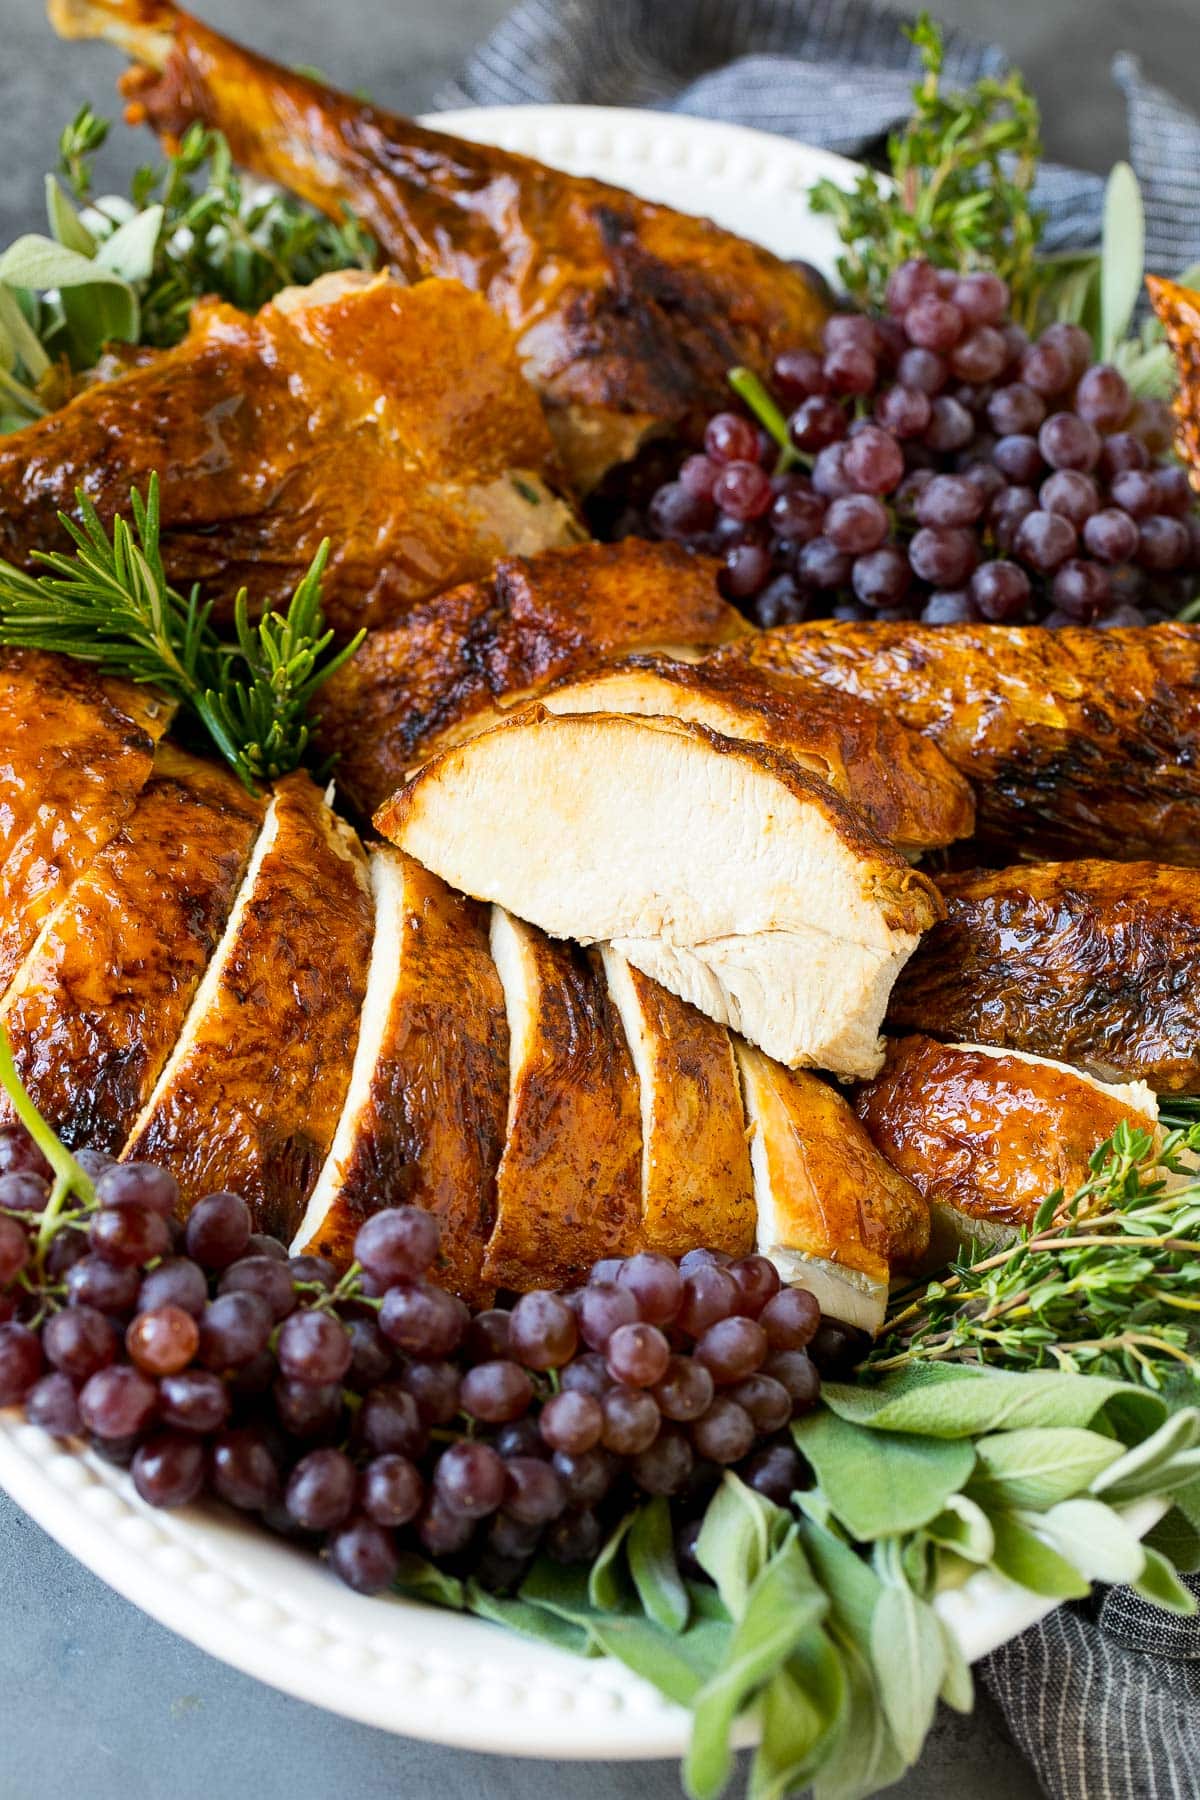 Sliced deep fried turkey garnished with grapes and herbs.